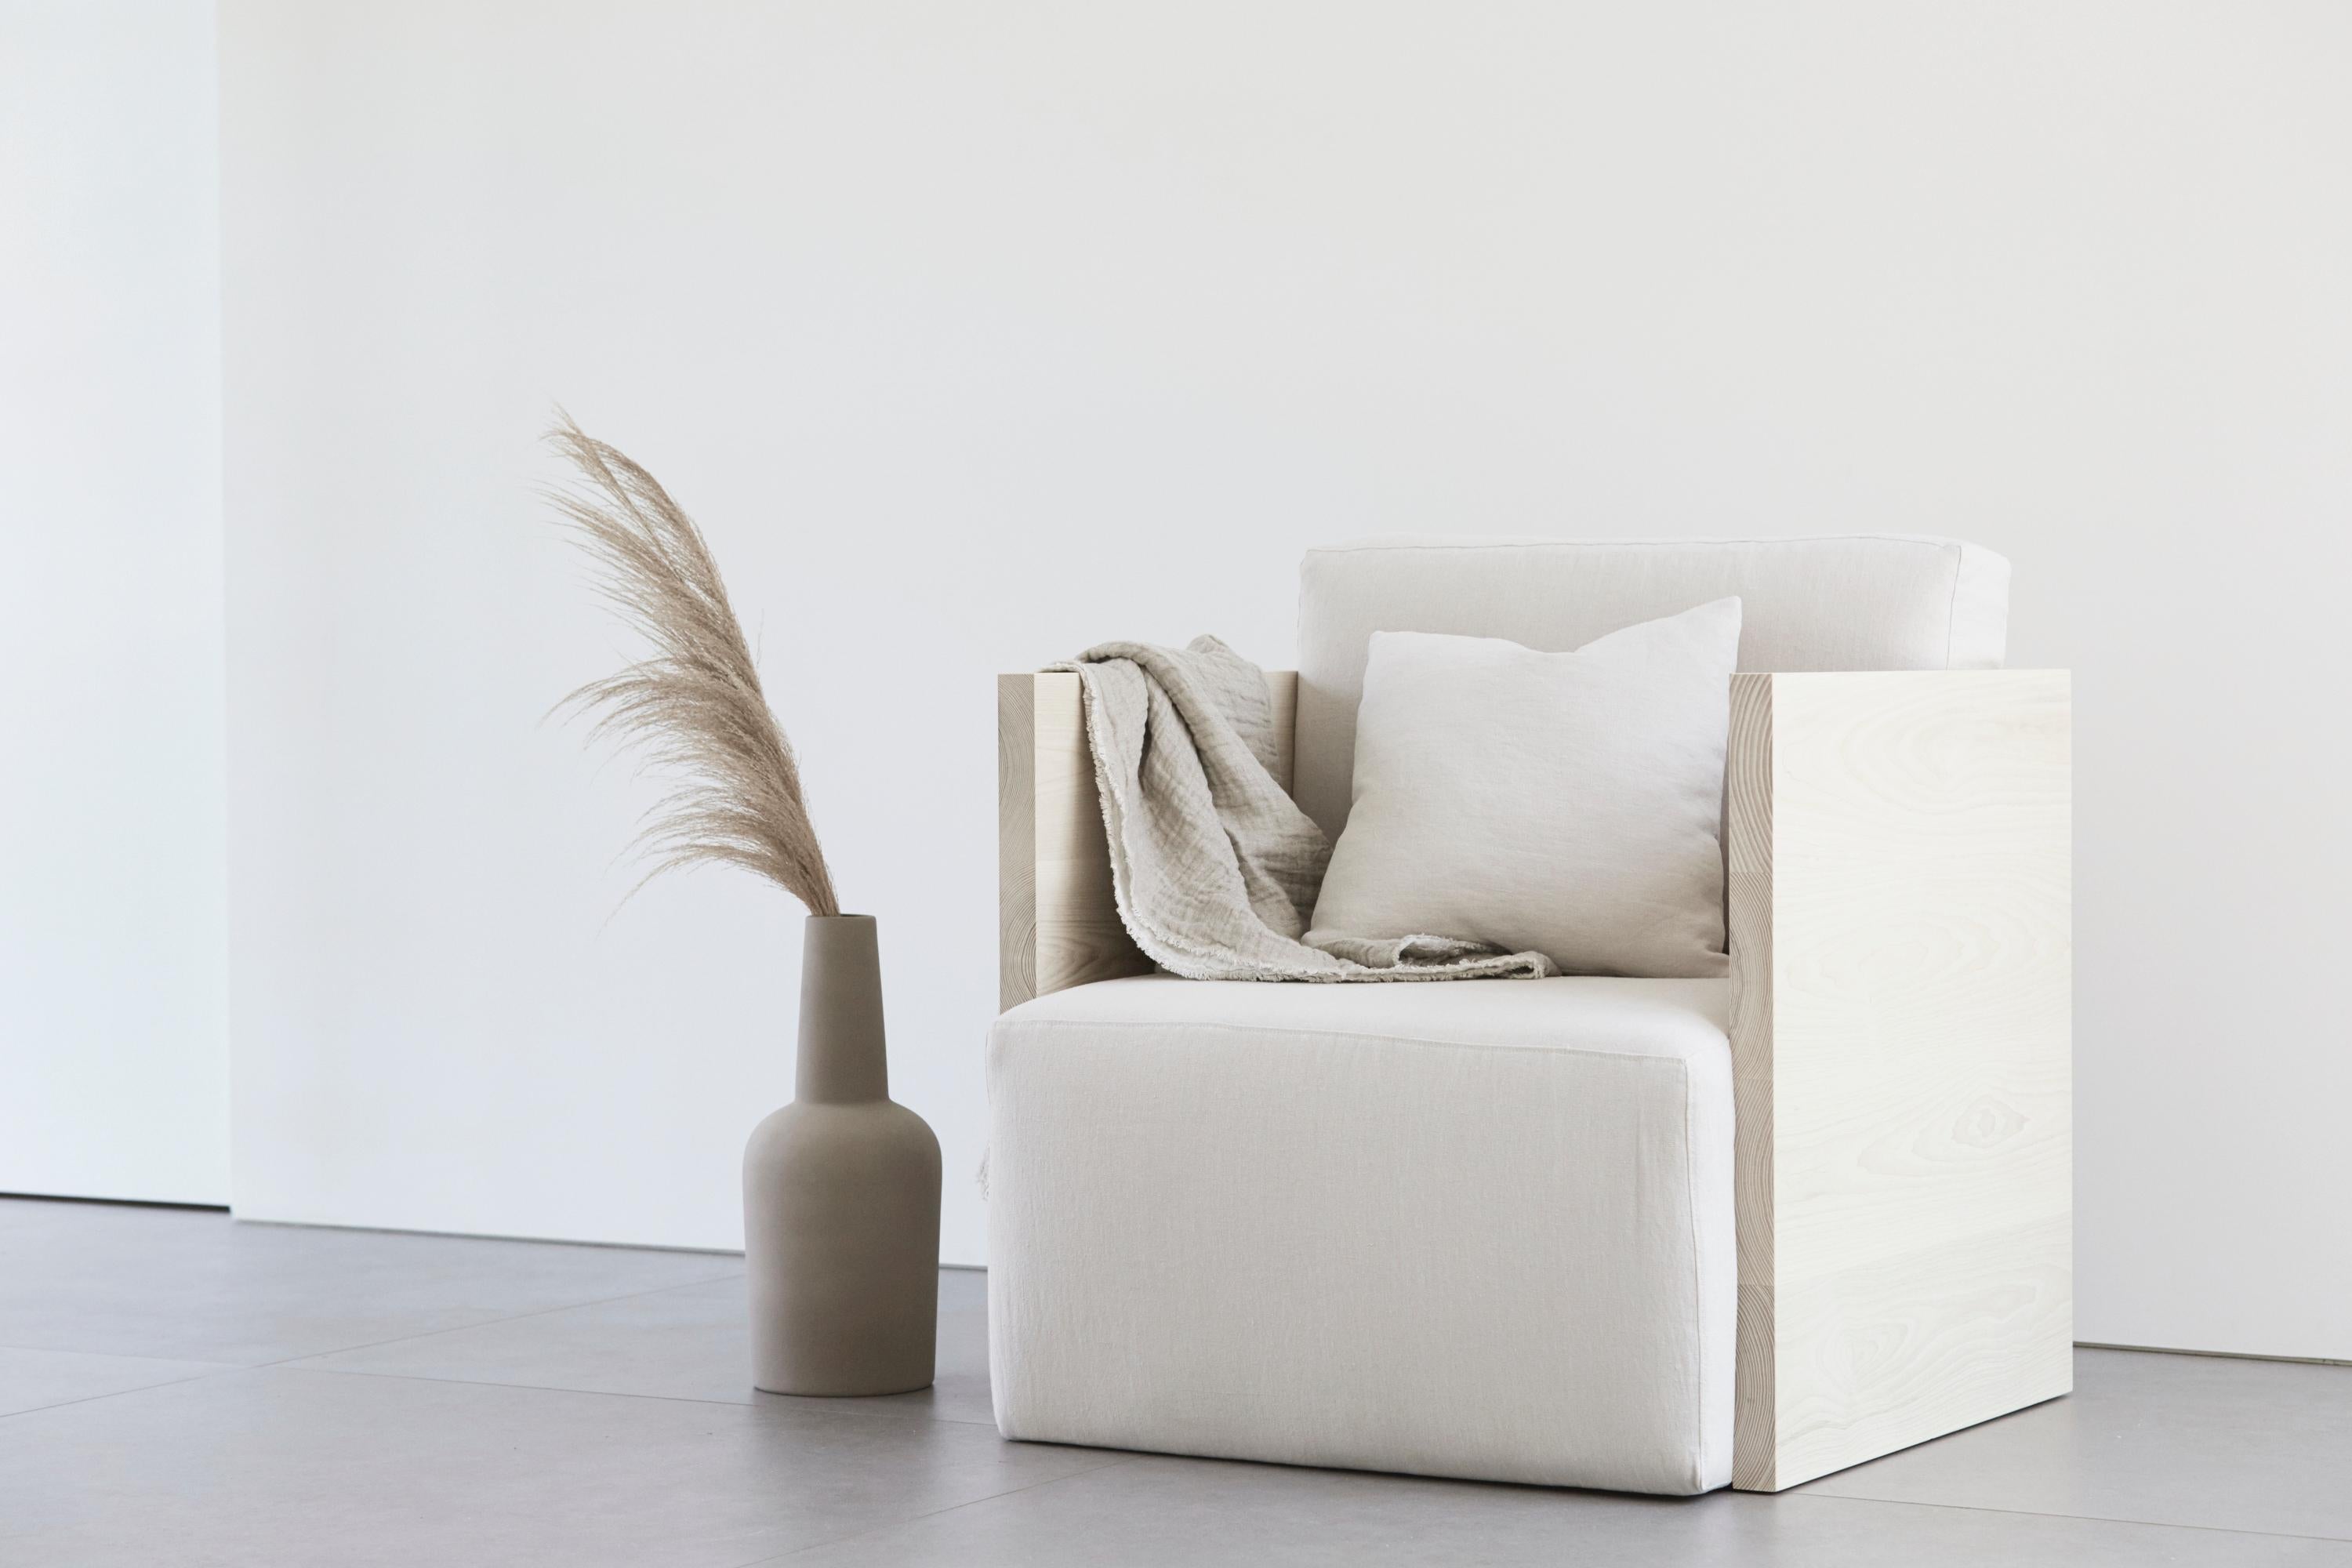 American Pure Minimalist Bleached Ash and Linen upholstered Club Chair by Ameé Allsop